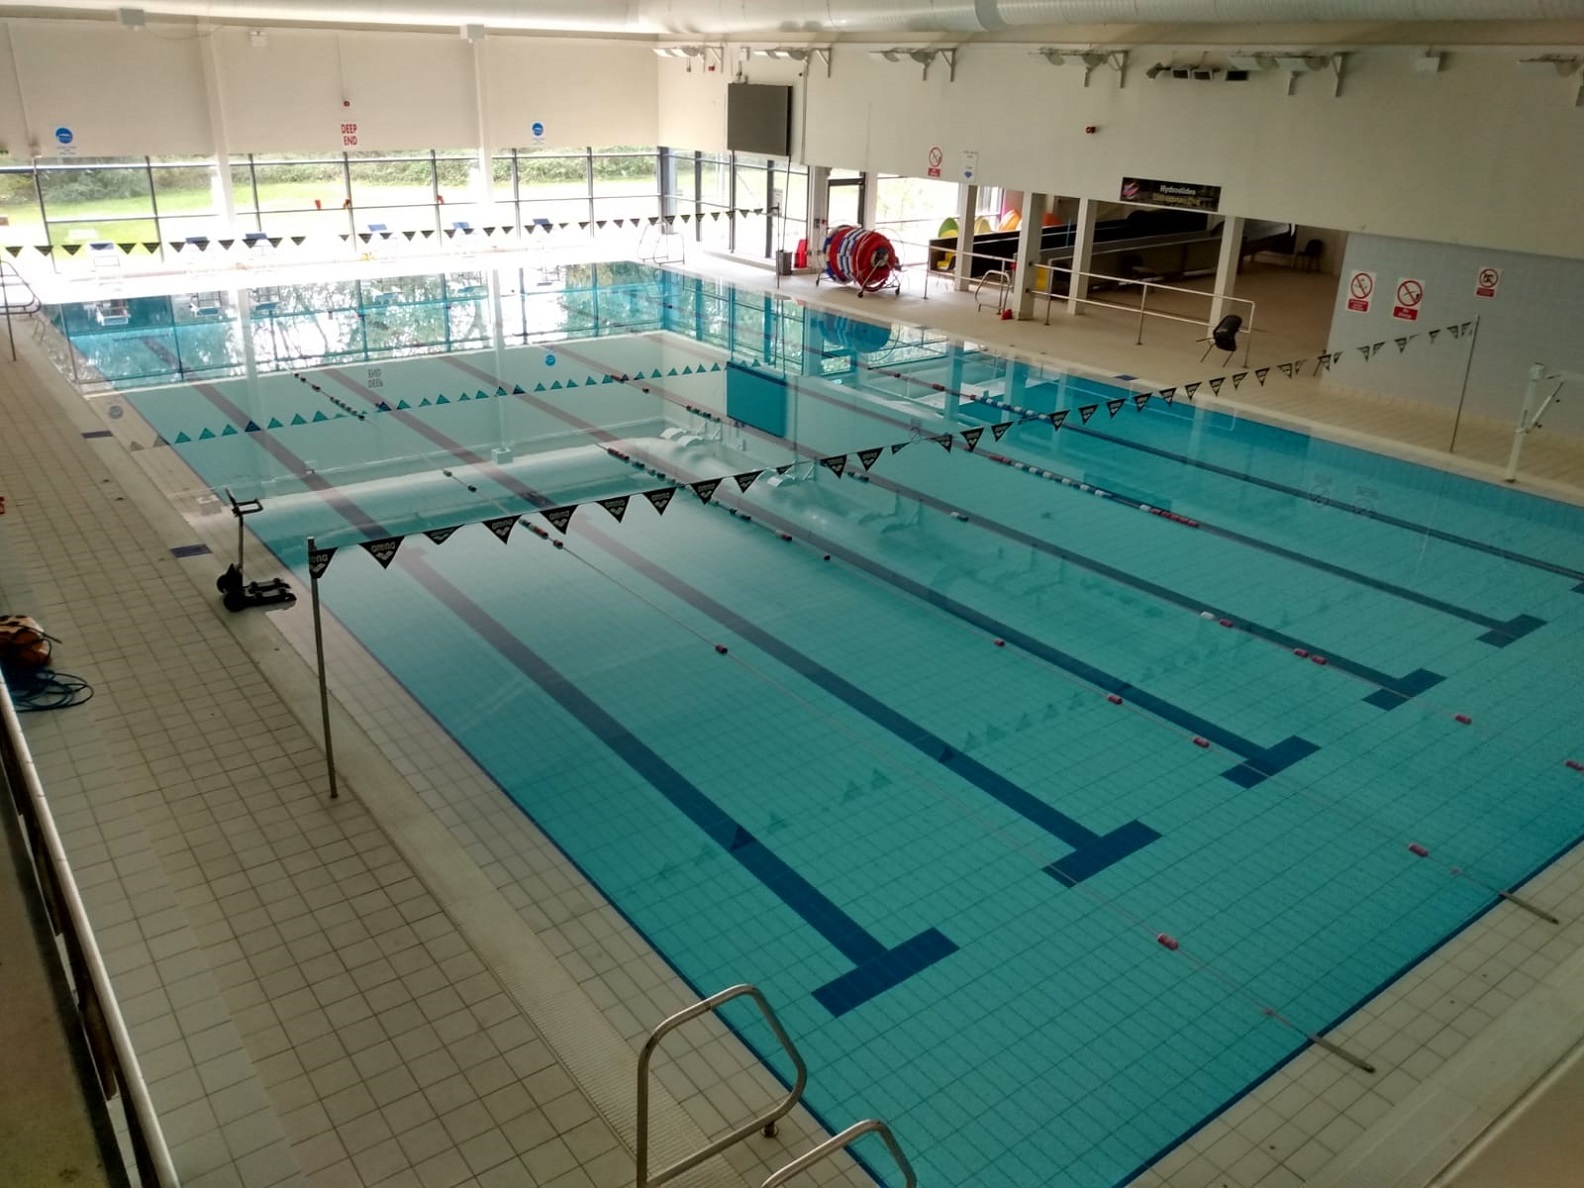 The pool at Pontypool Active Living Centre.